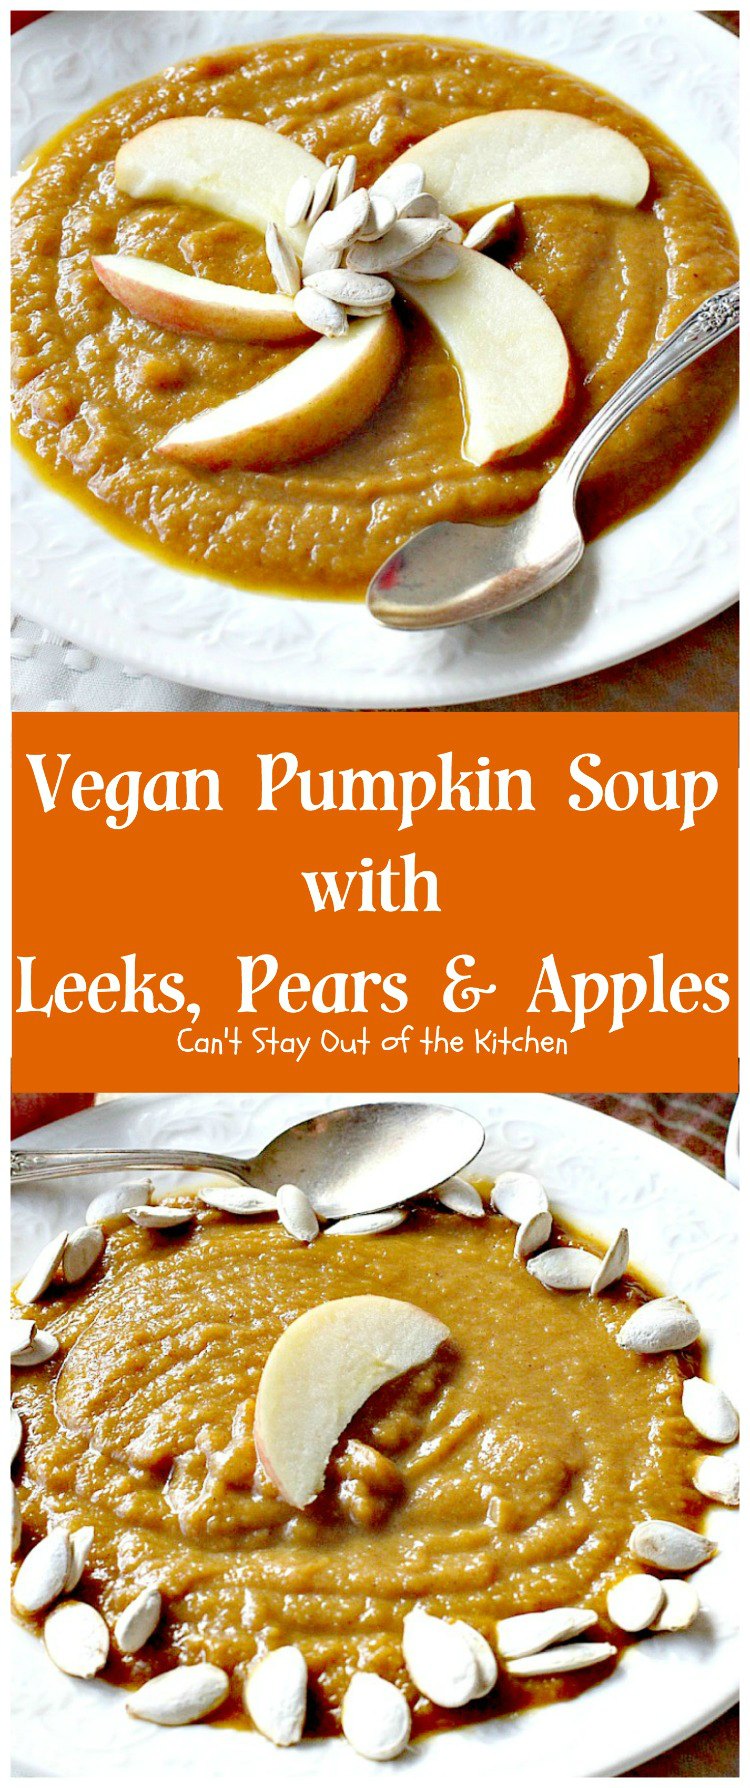 Vegan Pumpkin Soup with Leeks, Pears & Apples | Can't Stay Out of the Kitchen